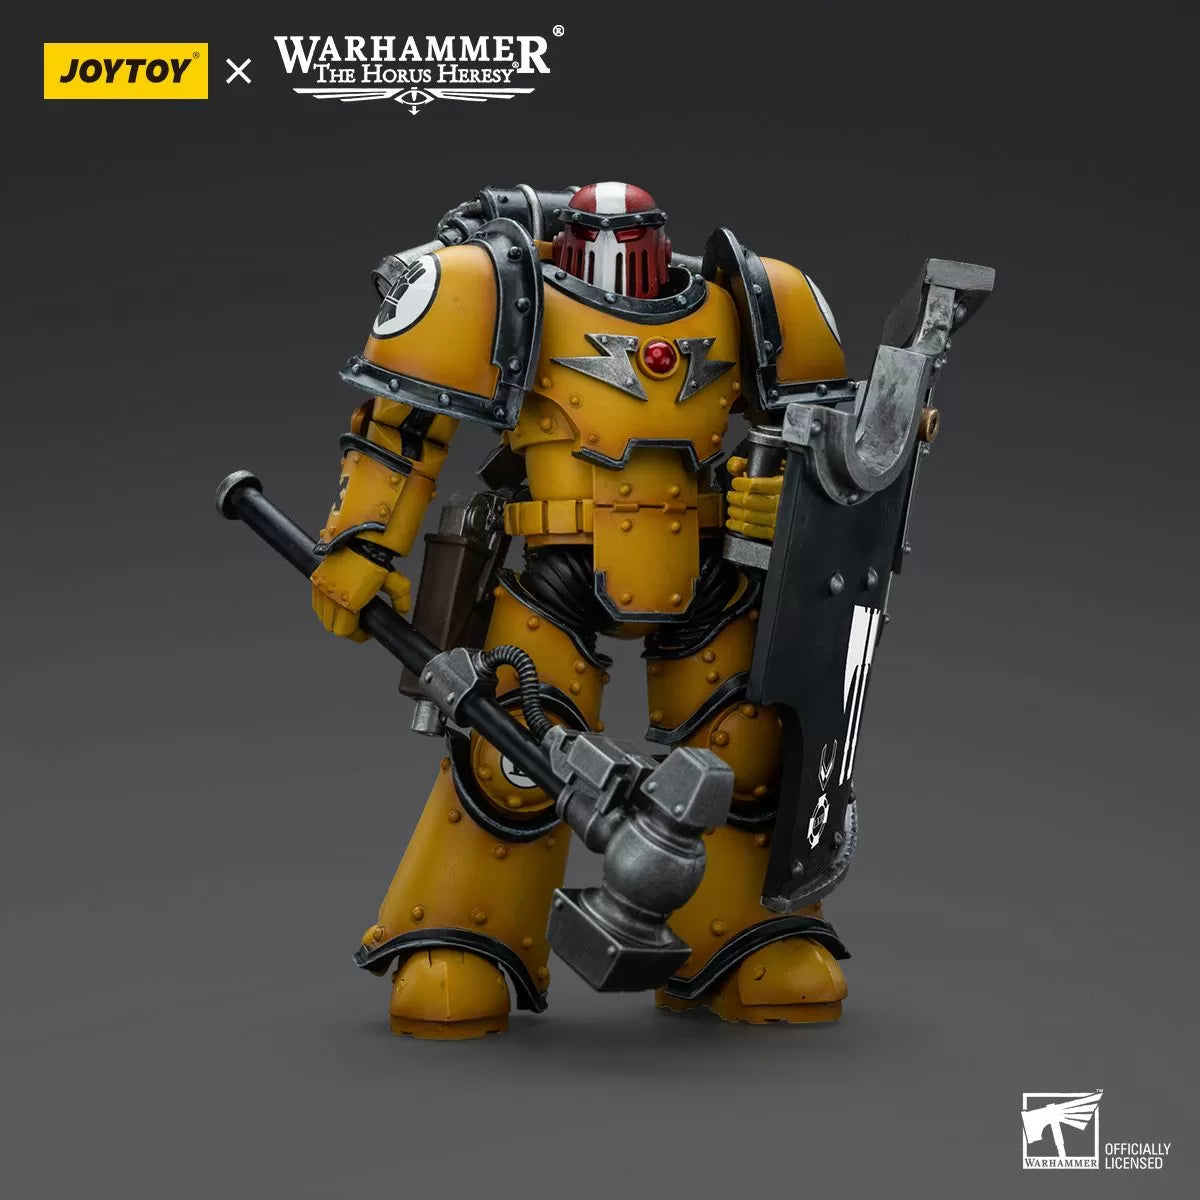 Warhammer Collectibles: 1/18 Scale Imperial Fists Legion MkIII Breacher Squad Sergeant with Hammer - Preorder